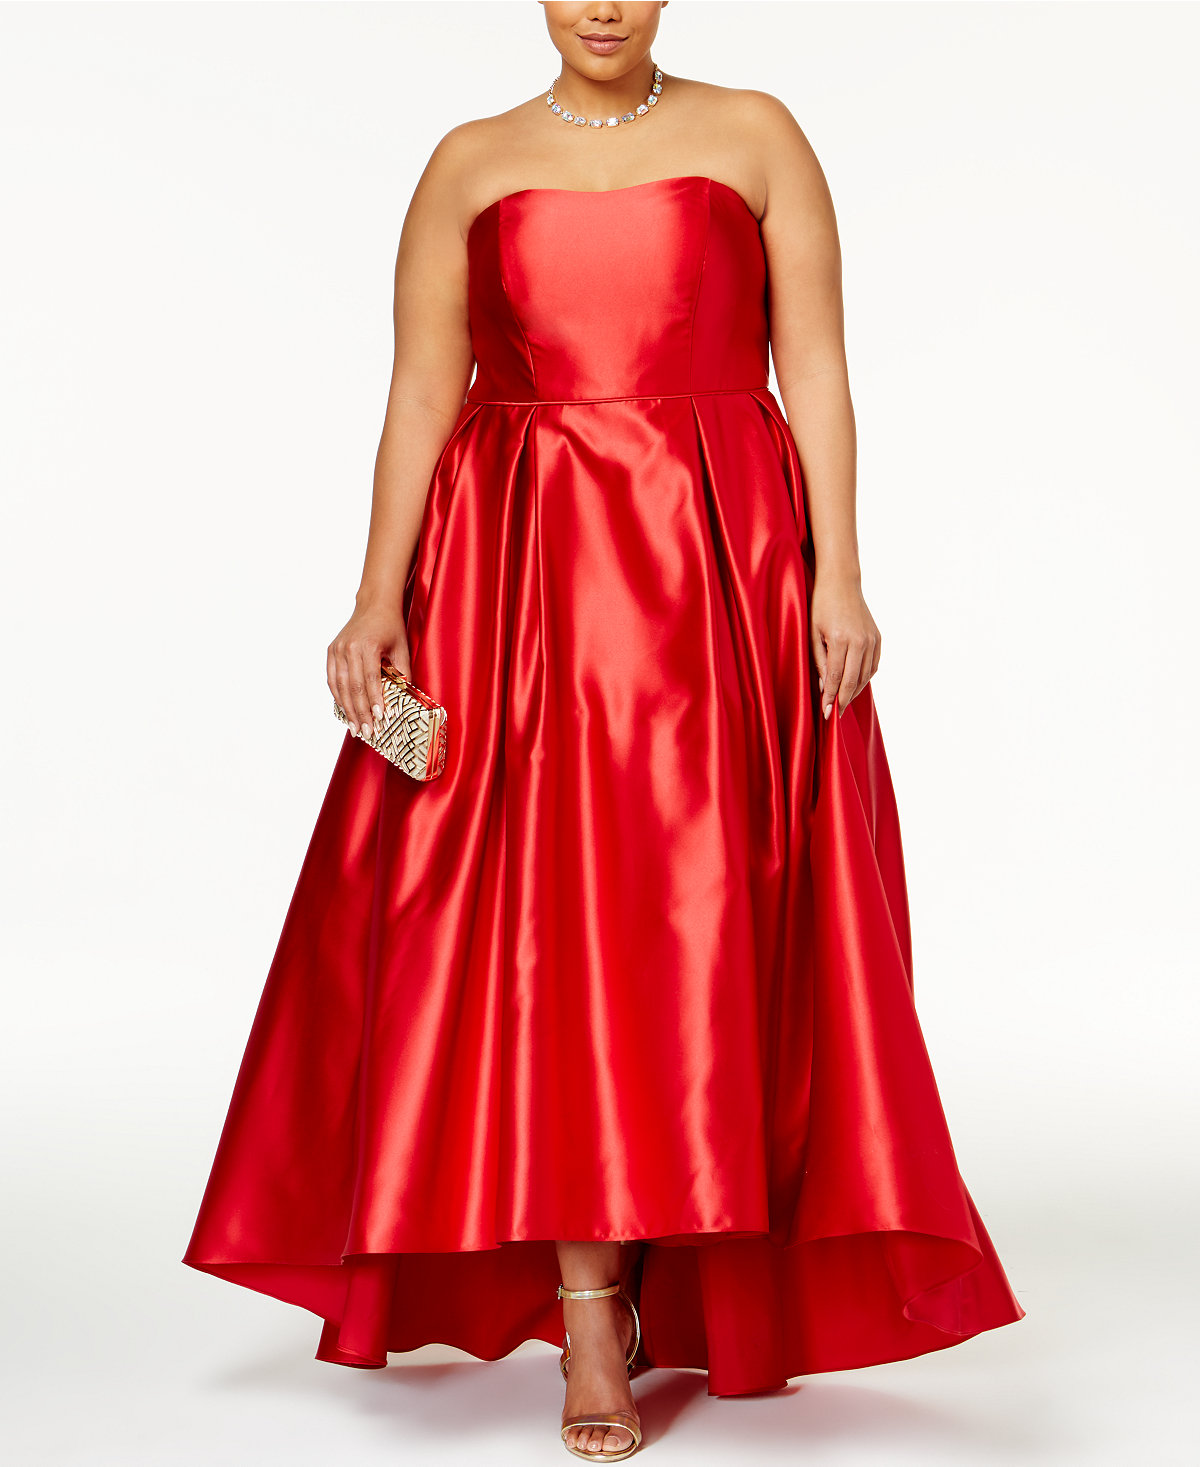 https://www.macys.com/shop/product/betsy-adam-plus-size-high-low-gown?ID=4395045&CategoryID=37038#fn=sp%3D6%26spc%3D1100%26ruleId%3D87%7CBOOST%20SAVED%20SET%7CBOOST%20ATTRIBUTE%26searchPass%3DmatchNone%26slotId%3D66